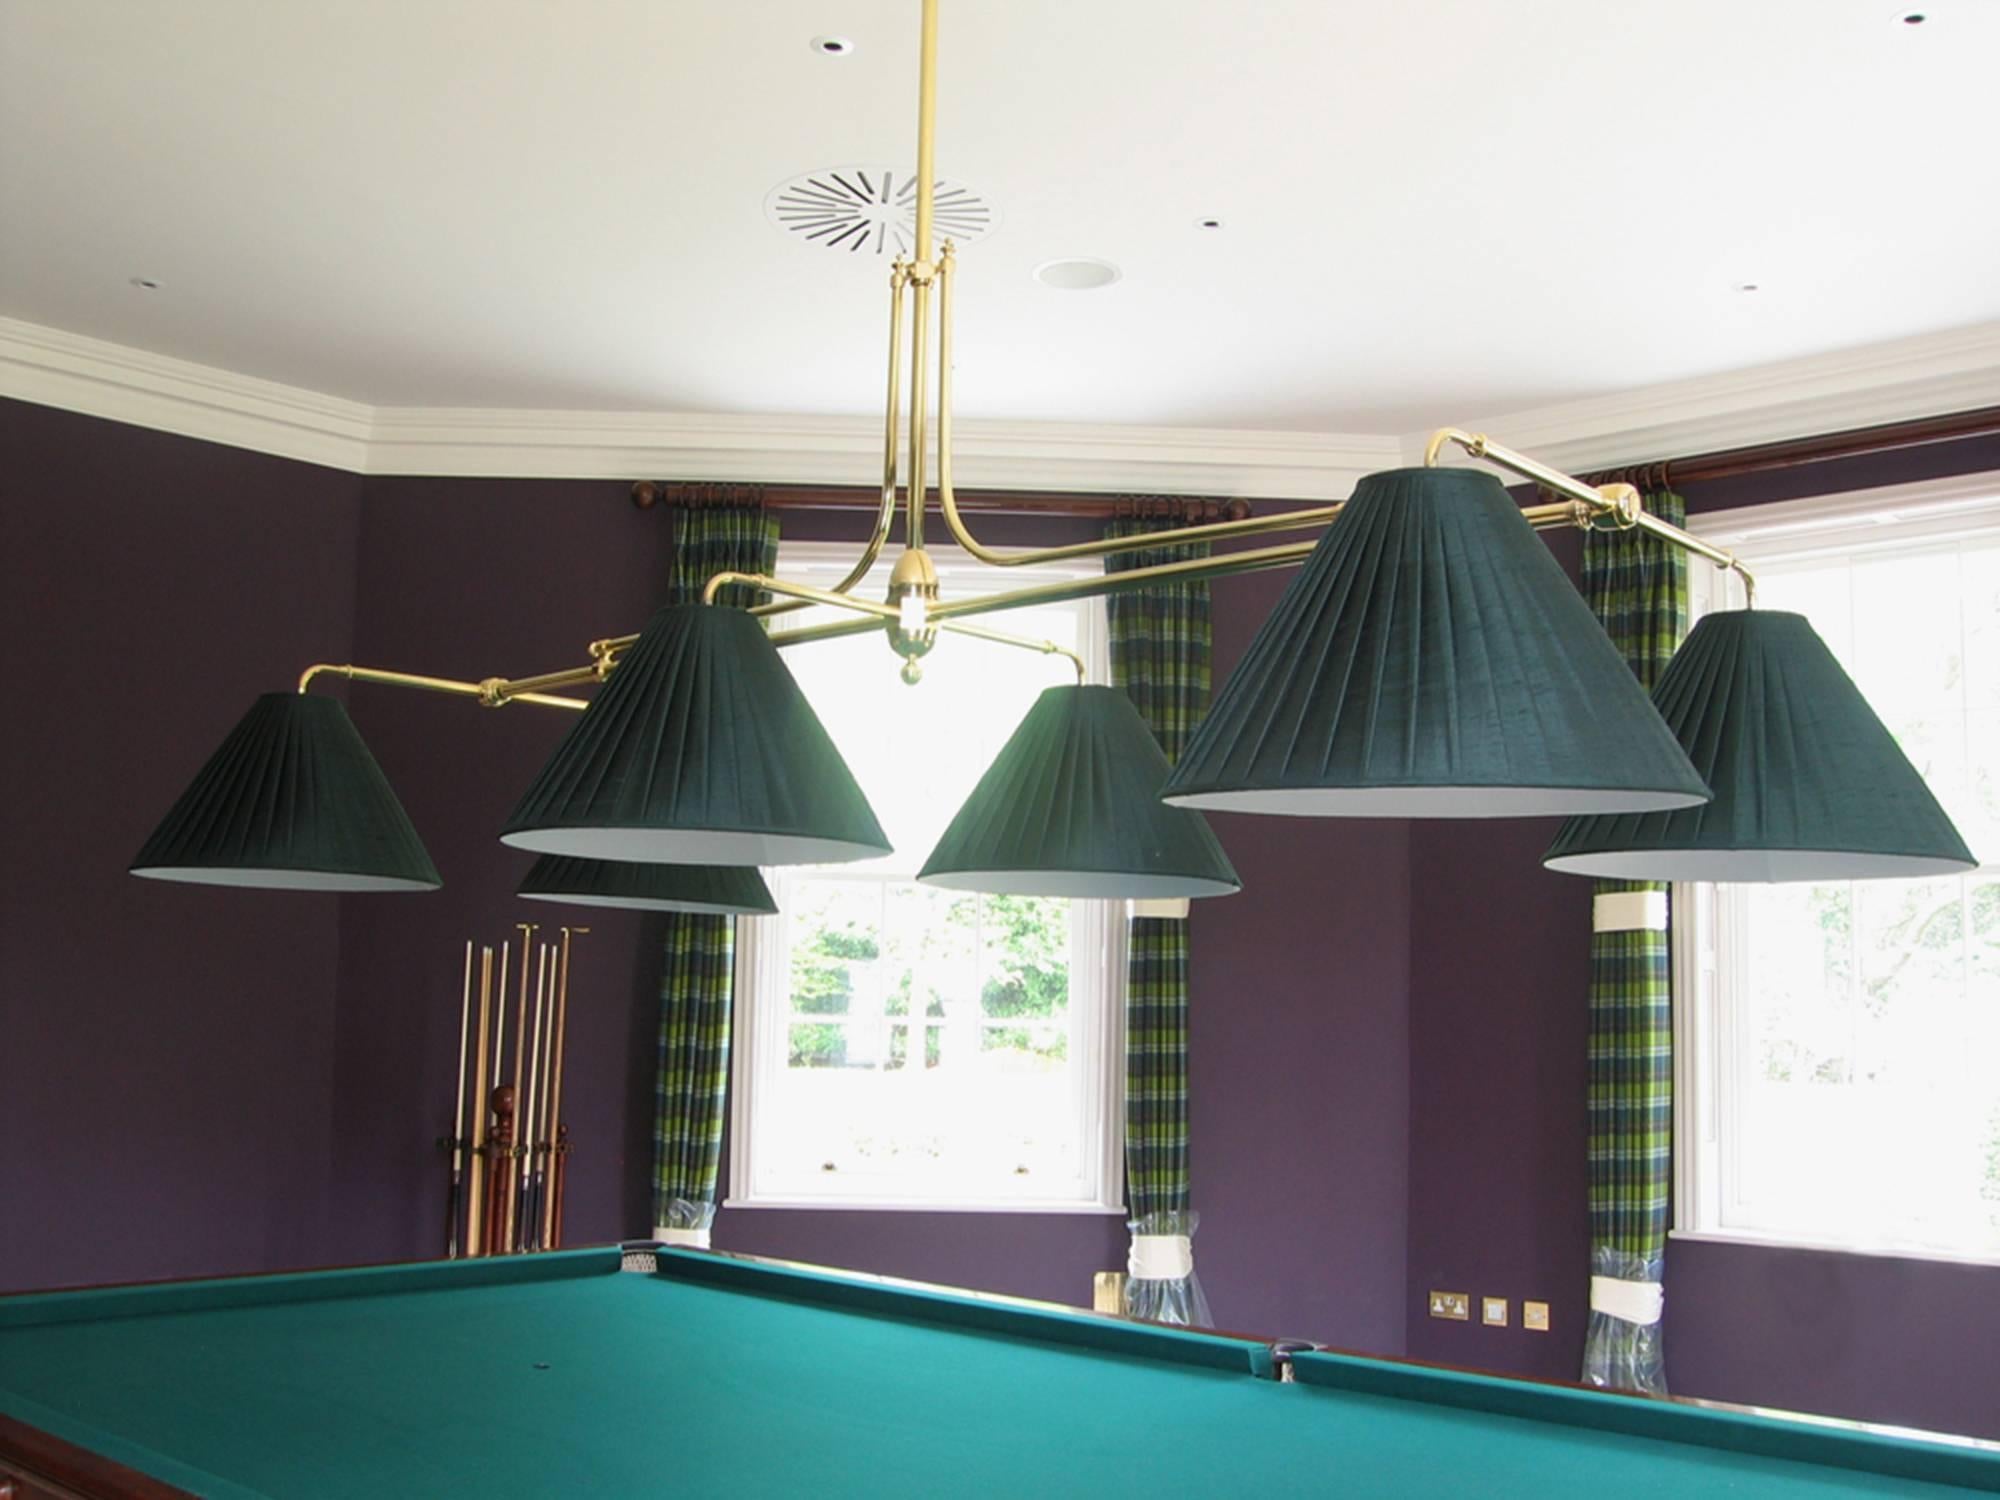 We manufacture these new bespoke lights to order and they can be scaled to fit any size Billiard, Snooker or pool table, we can also supply the traditional silk shades, a range of silk colours are available. The lead time is 6 to 8 weeks.